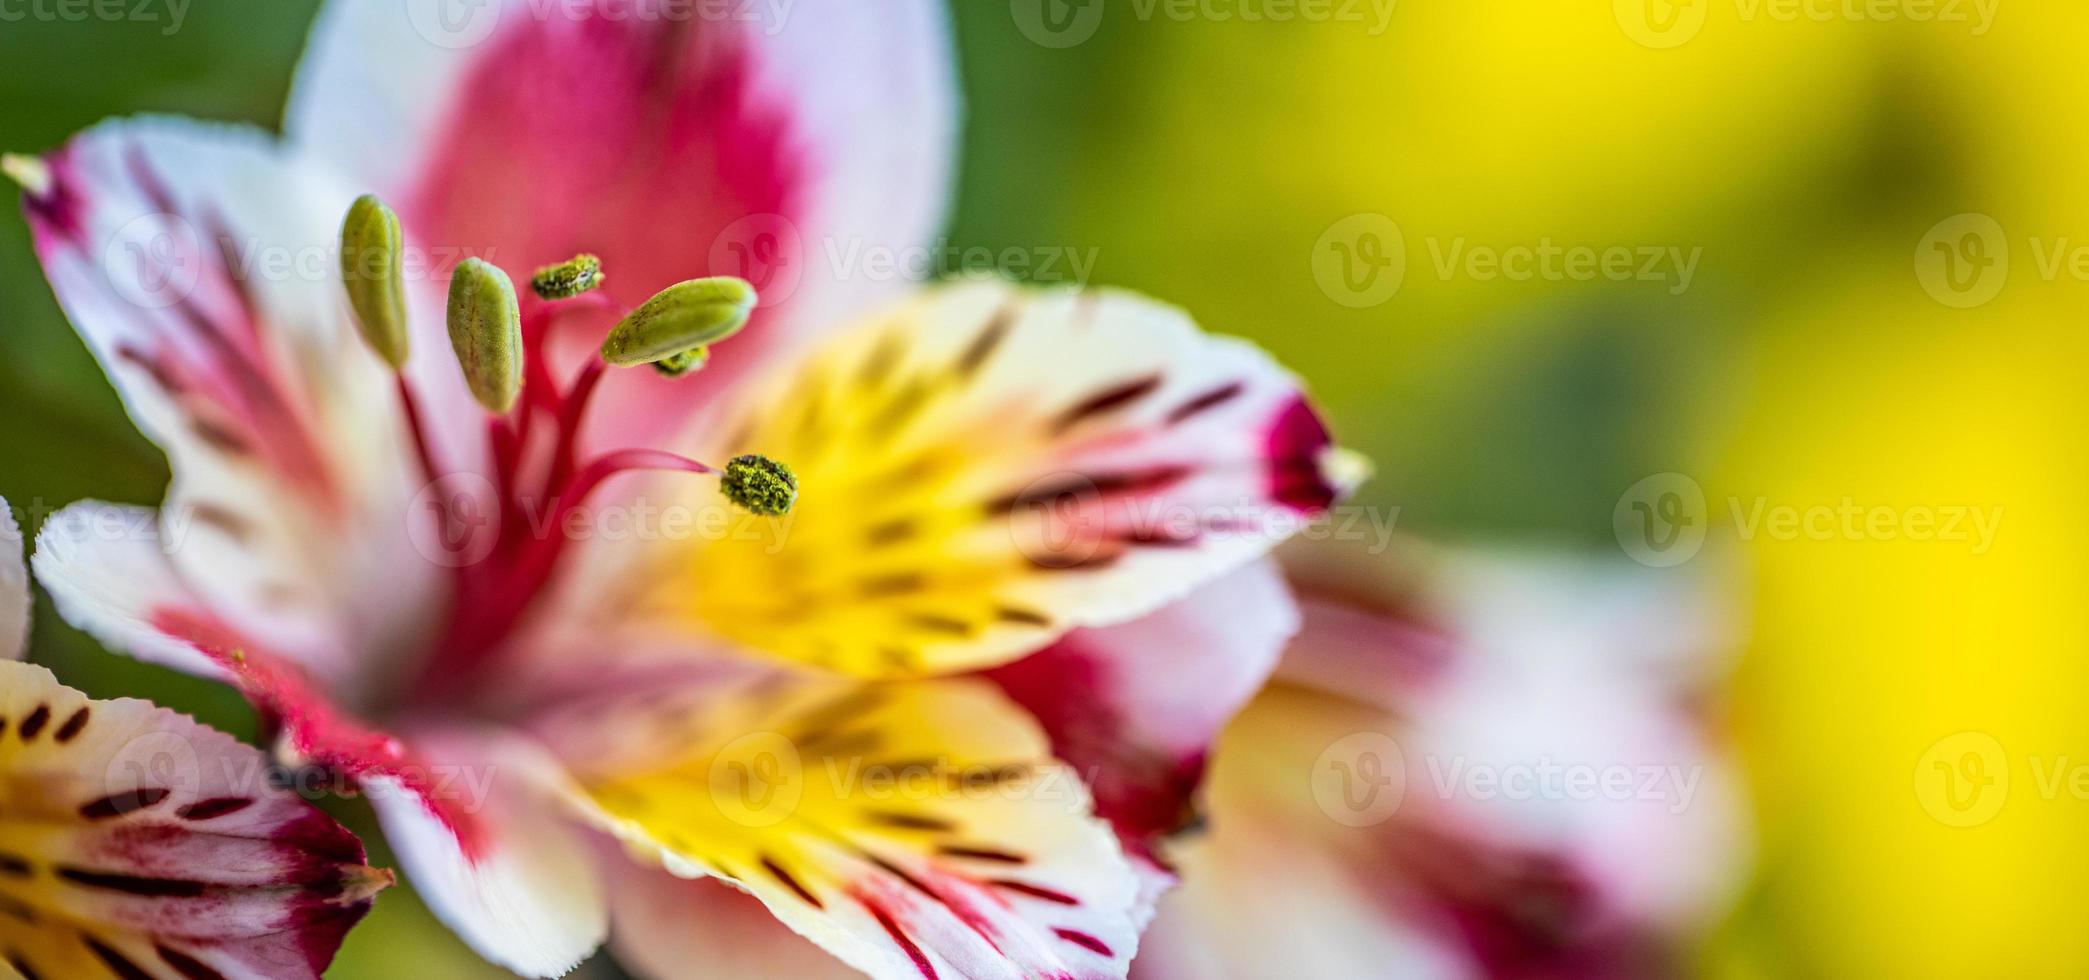 Single dreamy surreal colorful flower. Abstract soft light, bright colors, closeup floral garden. Nature concept, artistic beauty flowers photo